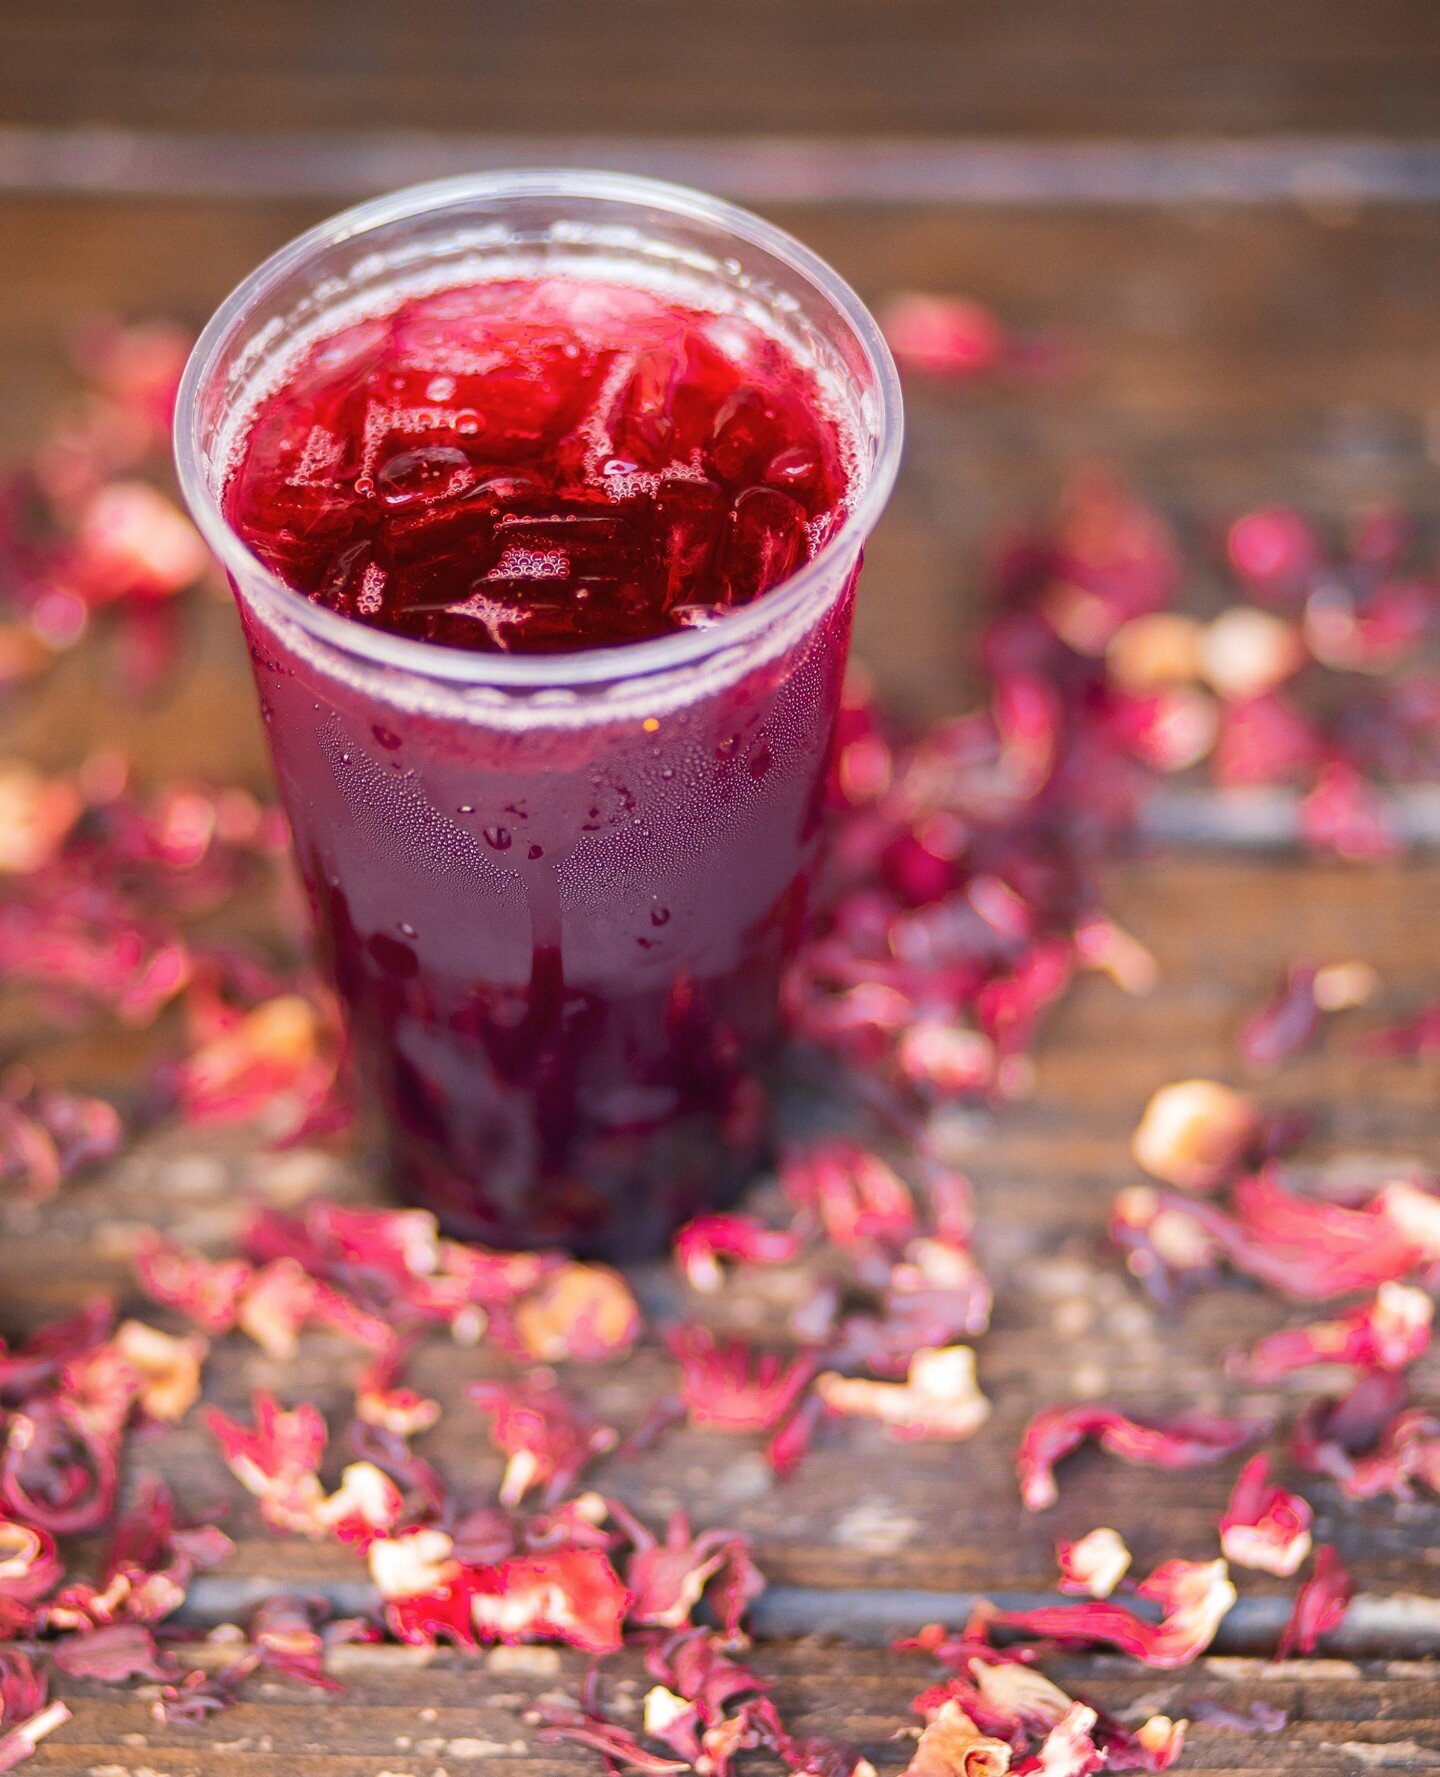 We feel refreshed just looking at it 😍 Make your summer day even better with out hibiscus iced tea!⁠
⁠
💚 Order Heritage Eats for delivery or pick up!  Go to www.heritageeats.com and hit 'Order Online,' or find us on DoorDash or UberEats!⁠
⁠⁠
🦞 Exp